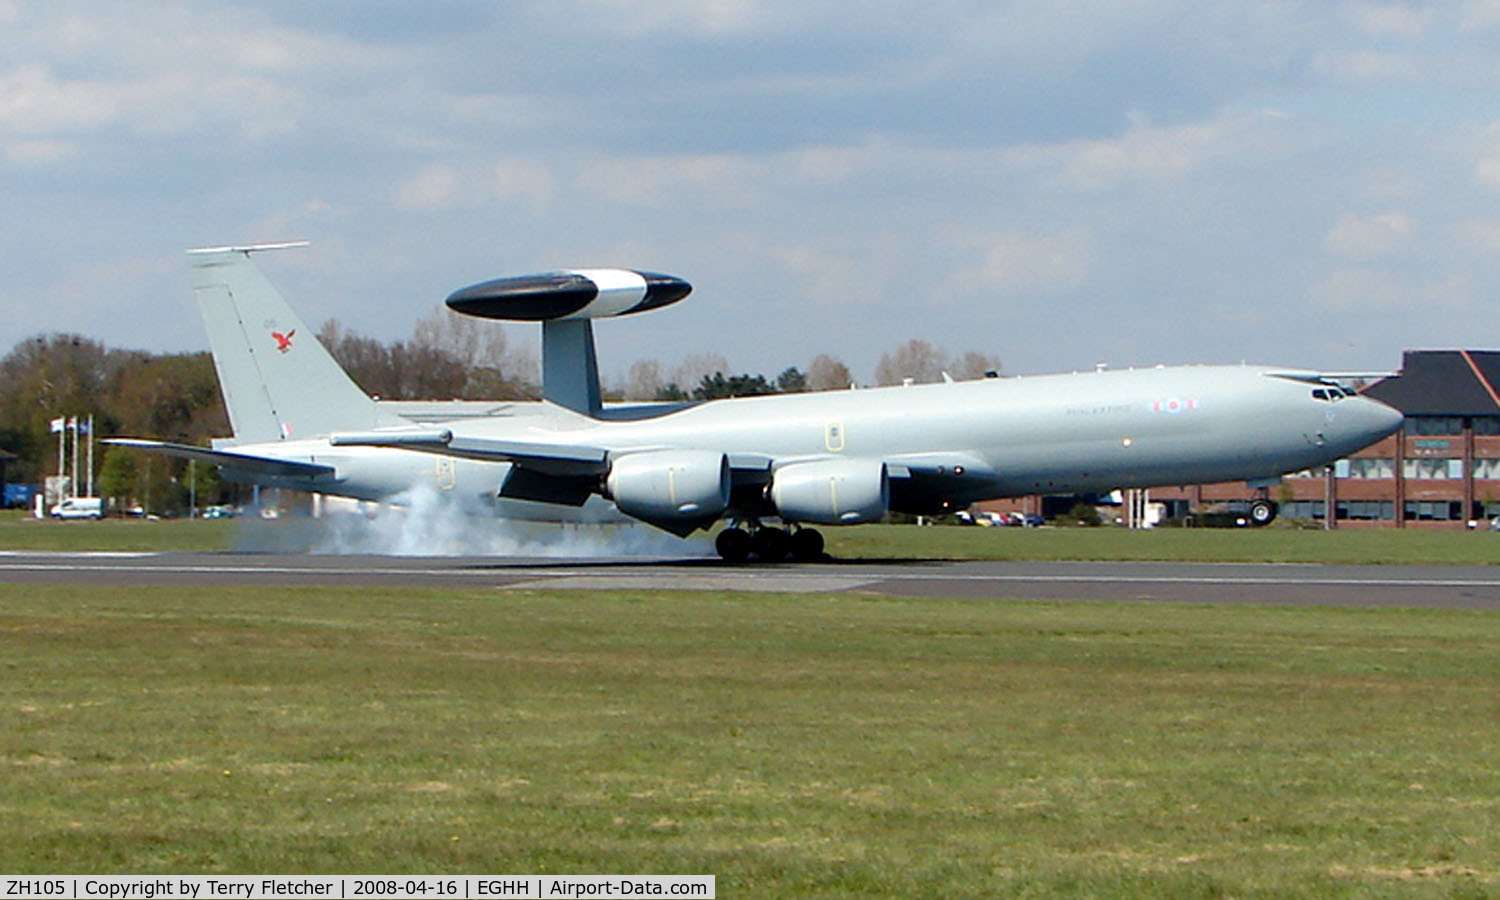 ZH105, 1991 Boeing E-3D Sentry AEW.1 C/N 24113, One of two AWACS E3 Sentries to land within the hour - breaking the monopoly of the local General Aviation scene